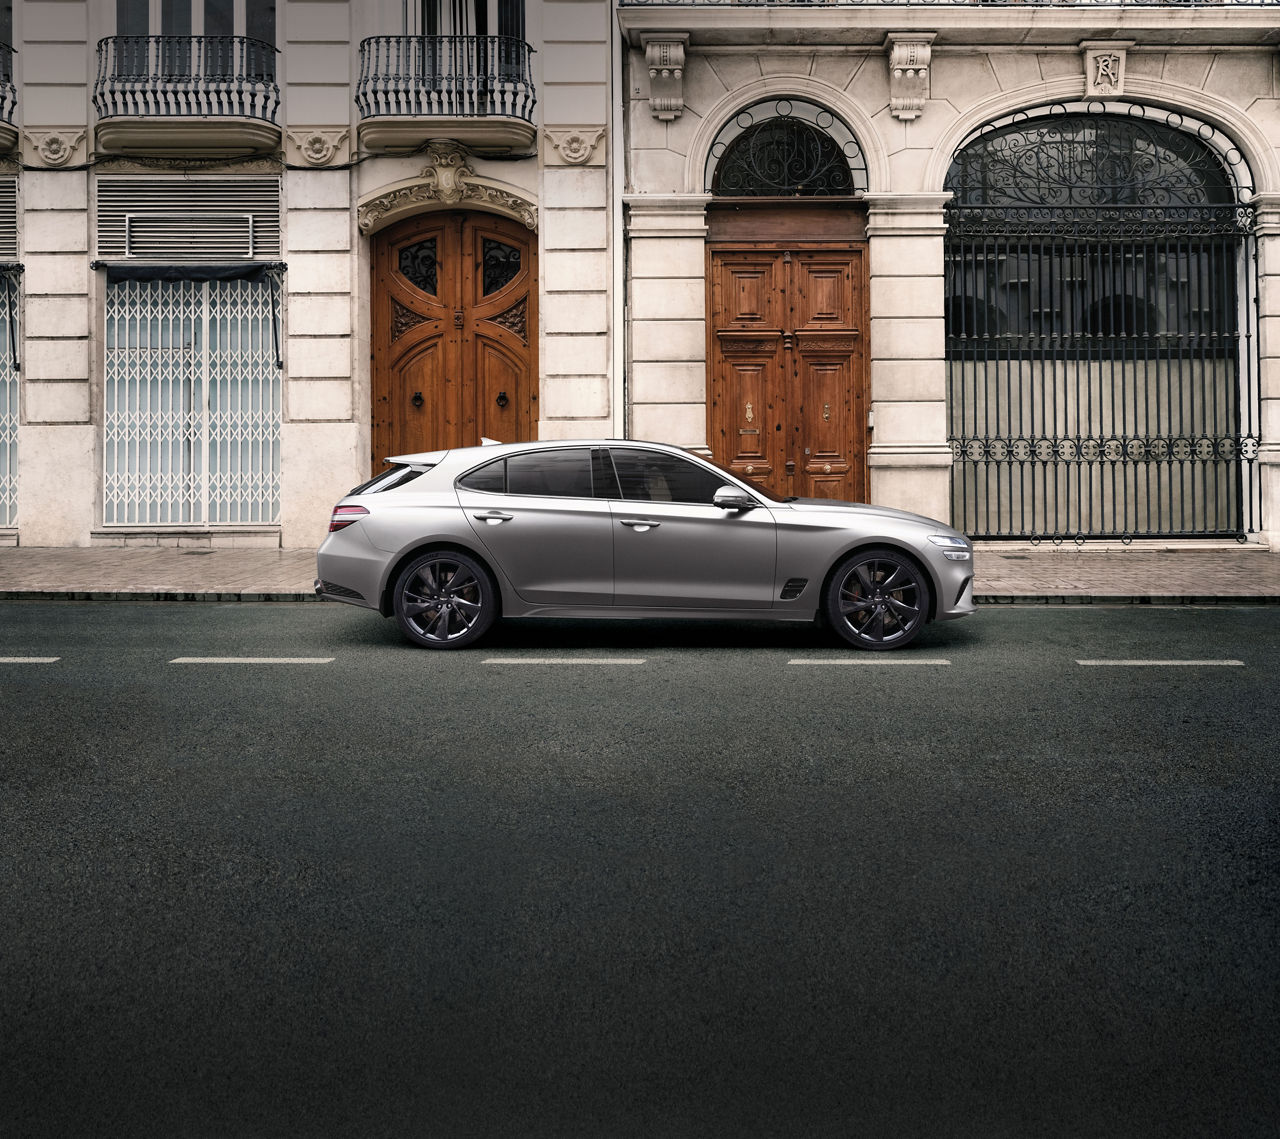 Genesis G70 Shooting Brake in silver is parking outdoor in front of a house facade